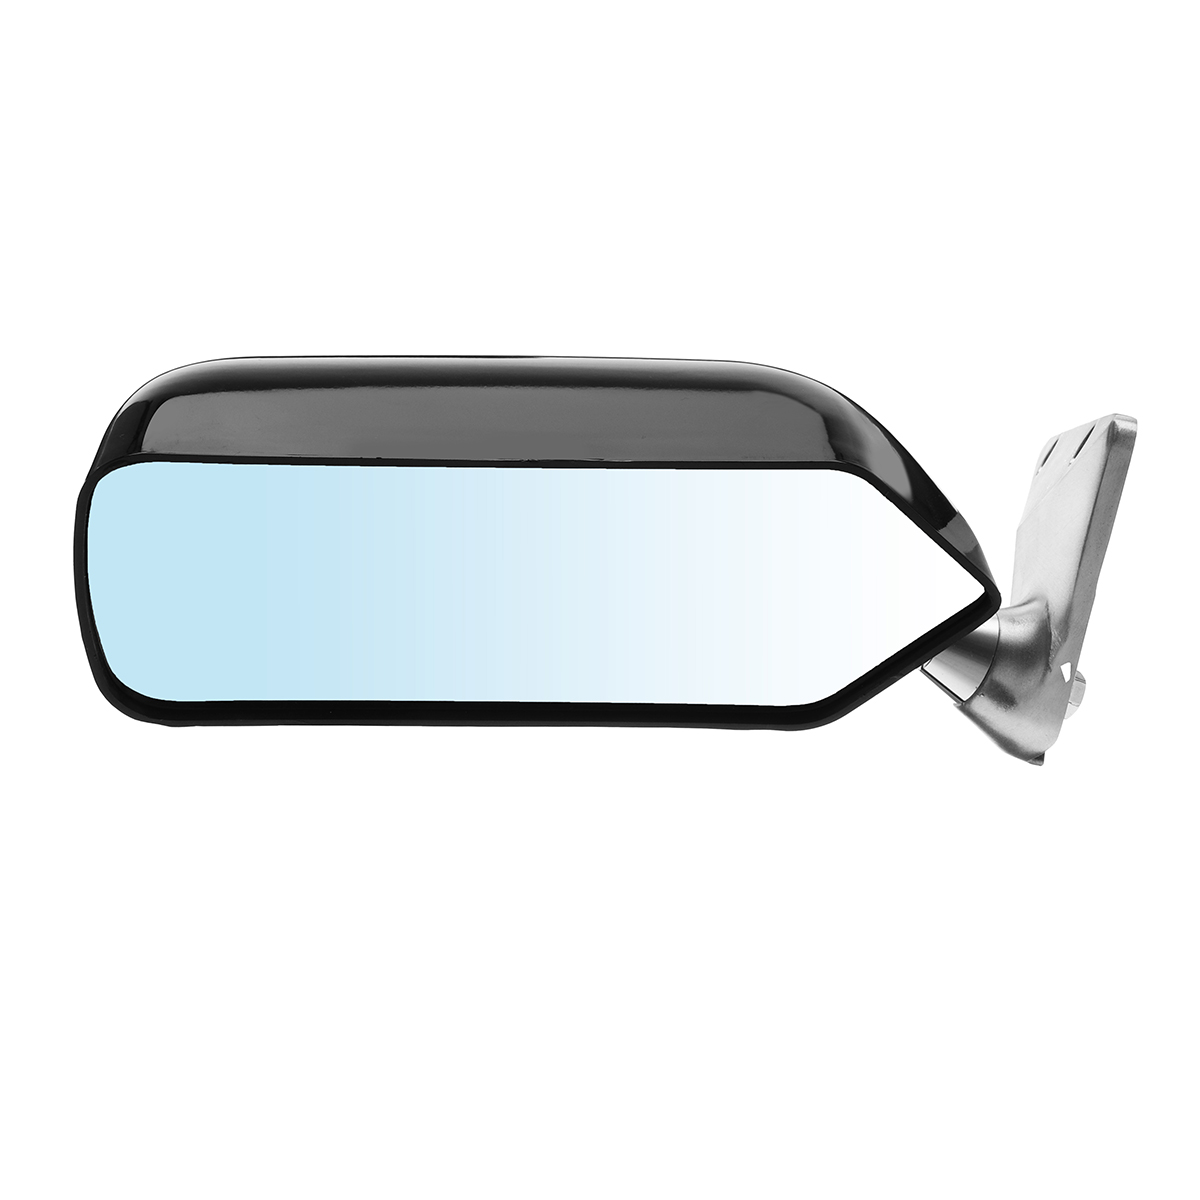 Universal F1 Style Blue Metal Bracket Side Car Left and Right Mirror - Auto GoShop